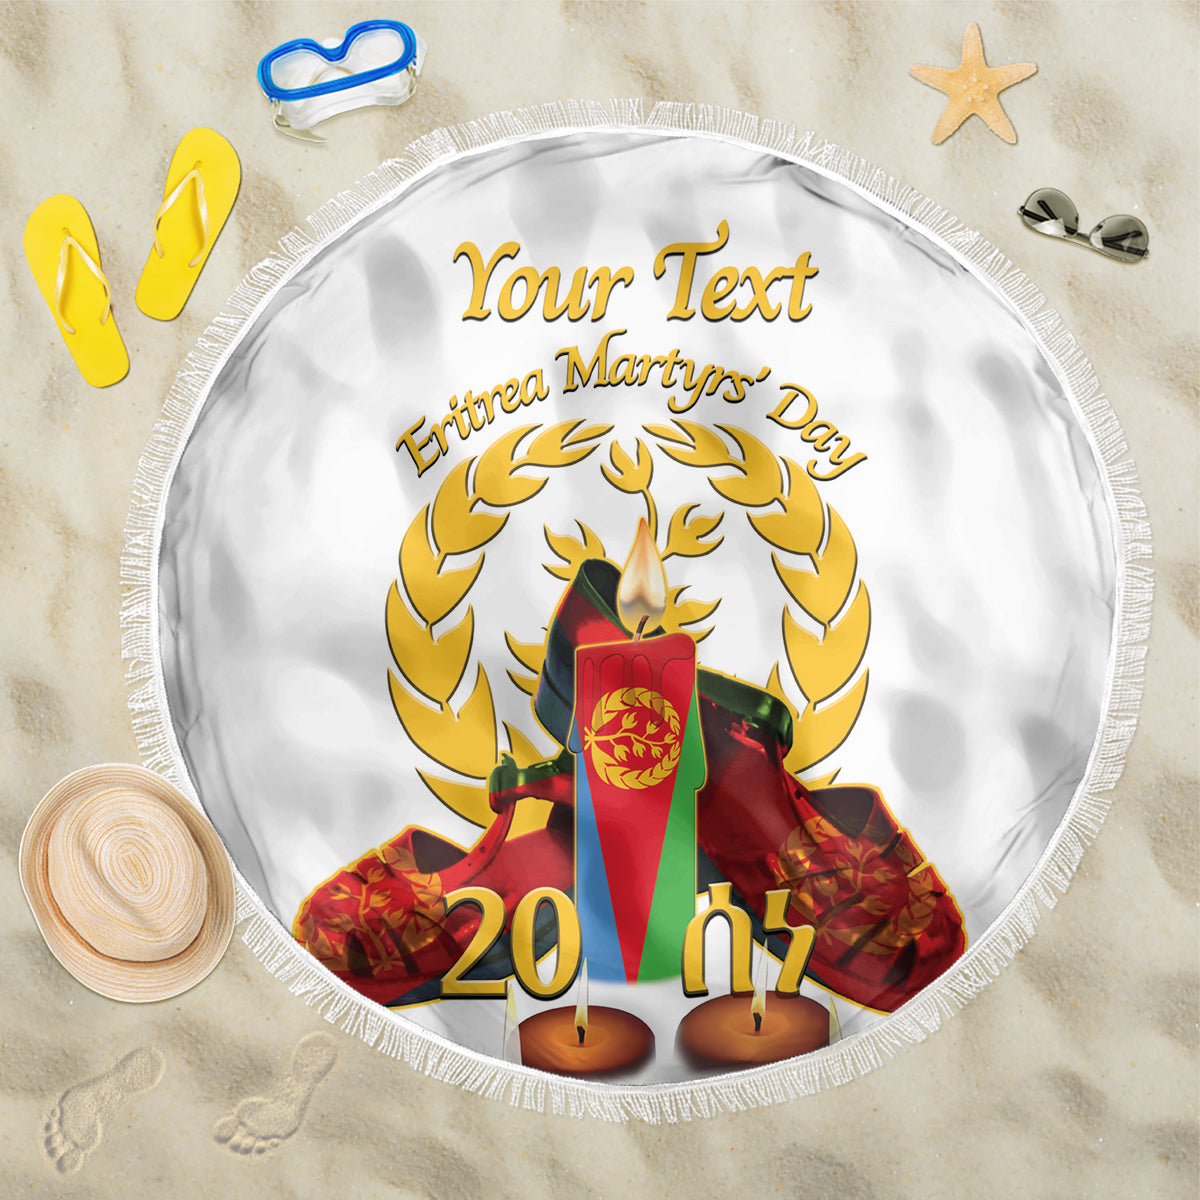 Custom Eritrea Martyrs' Day Beach Blanket 20 June Shida Shoes With Candles - White